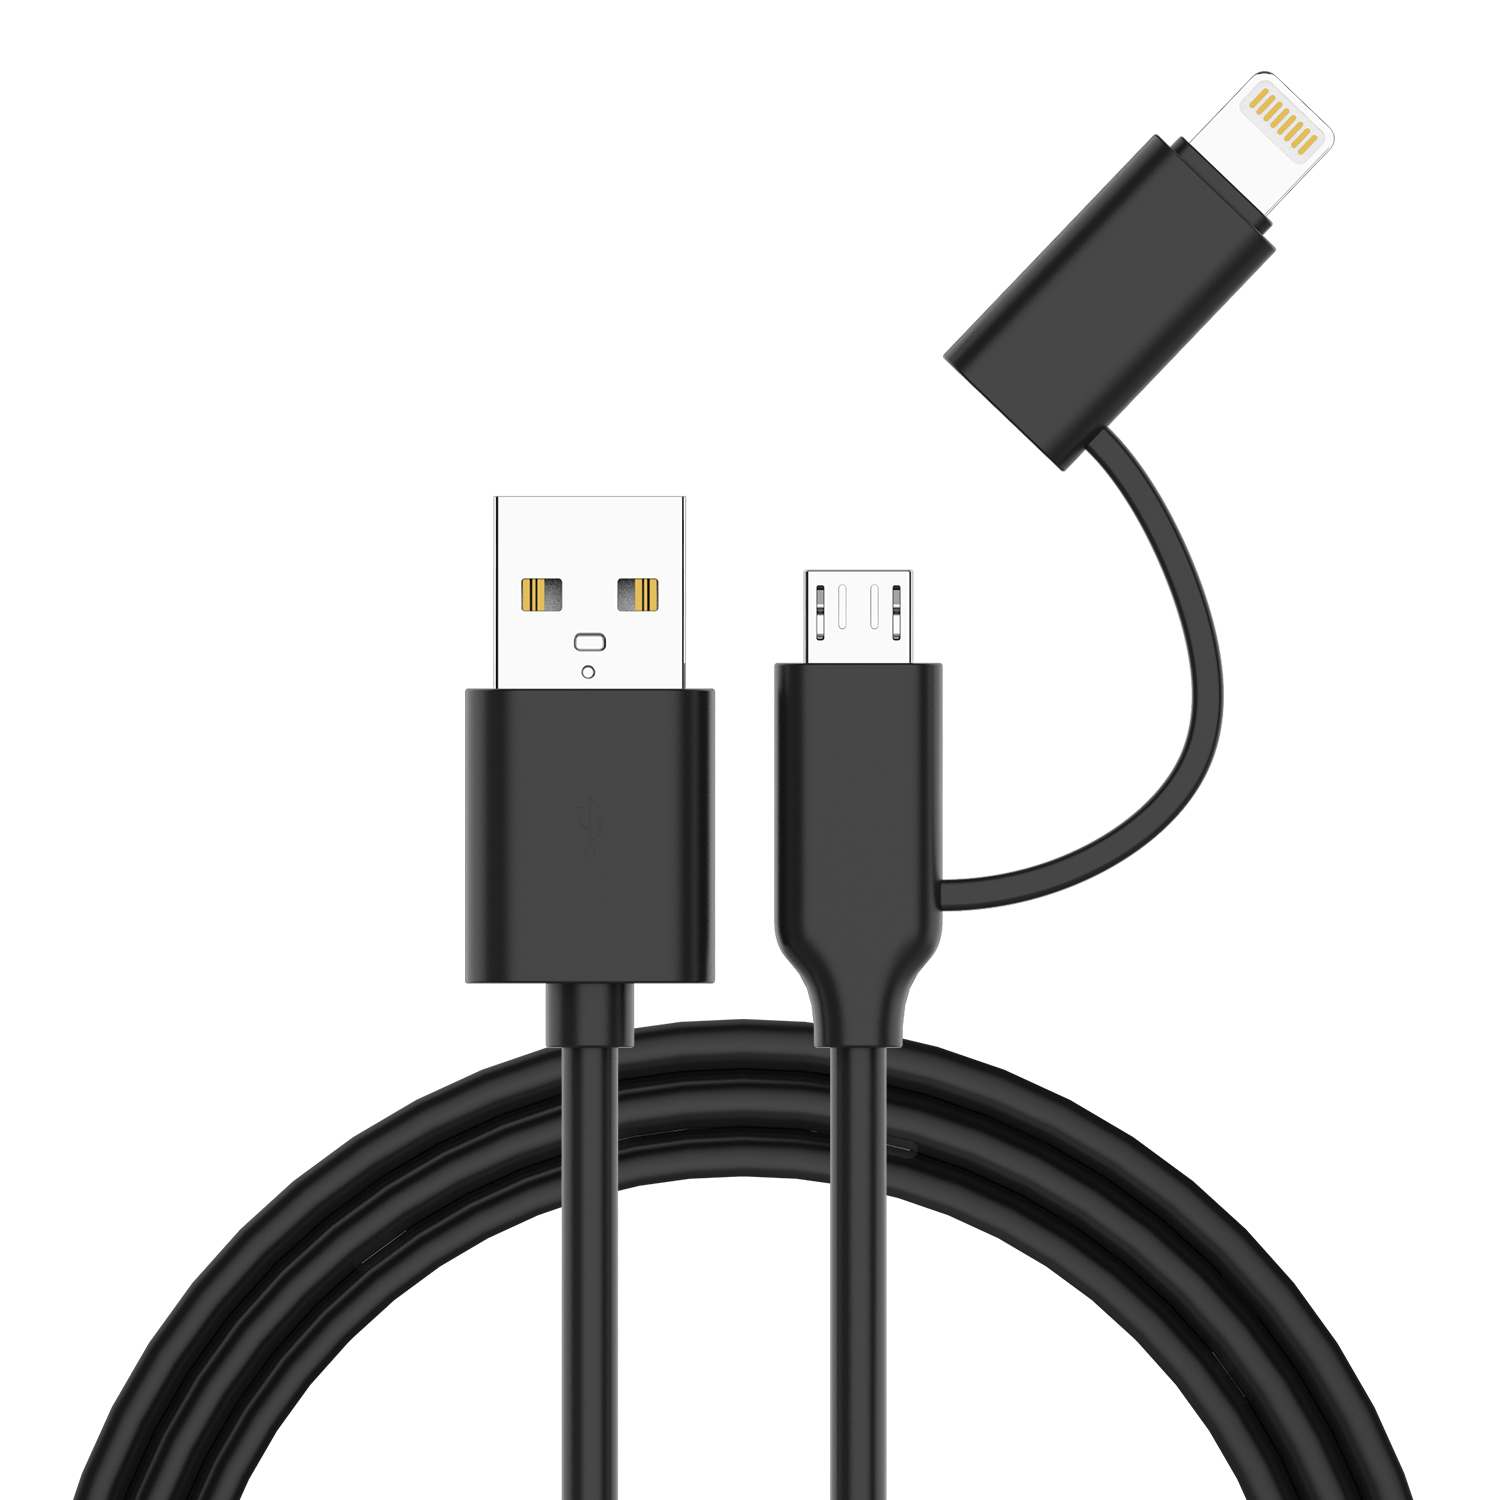 PD 60W Fast Charging Braided 3 in 1 USB Cable